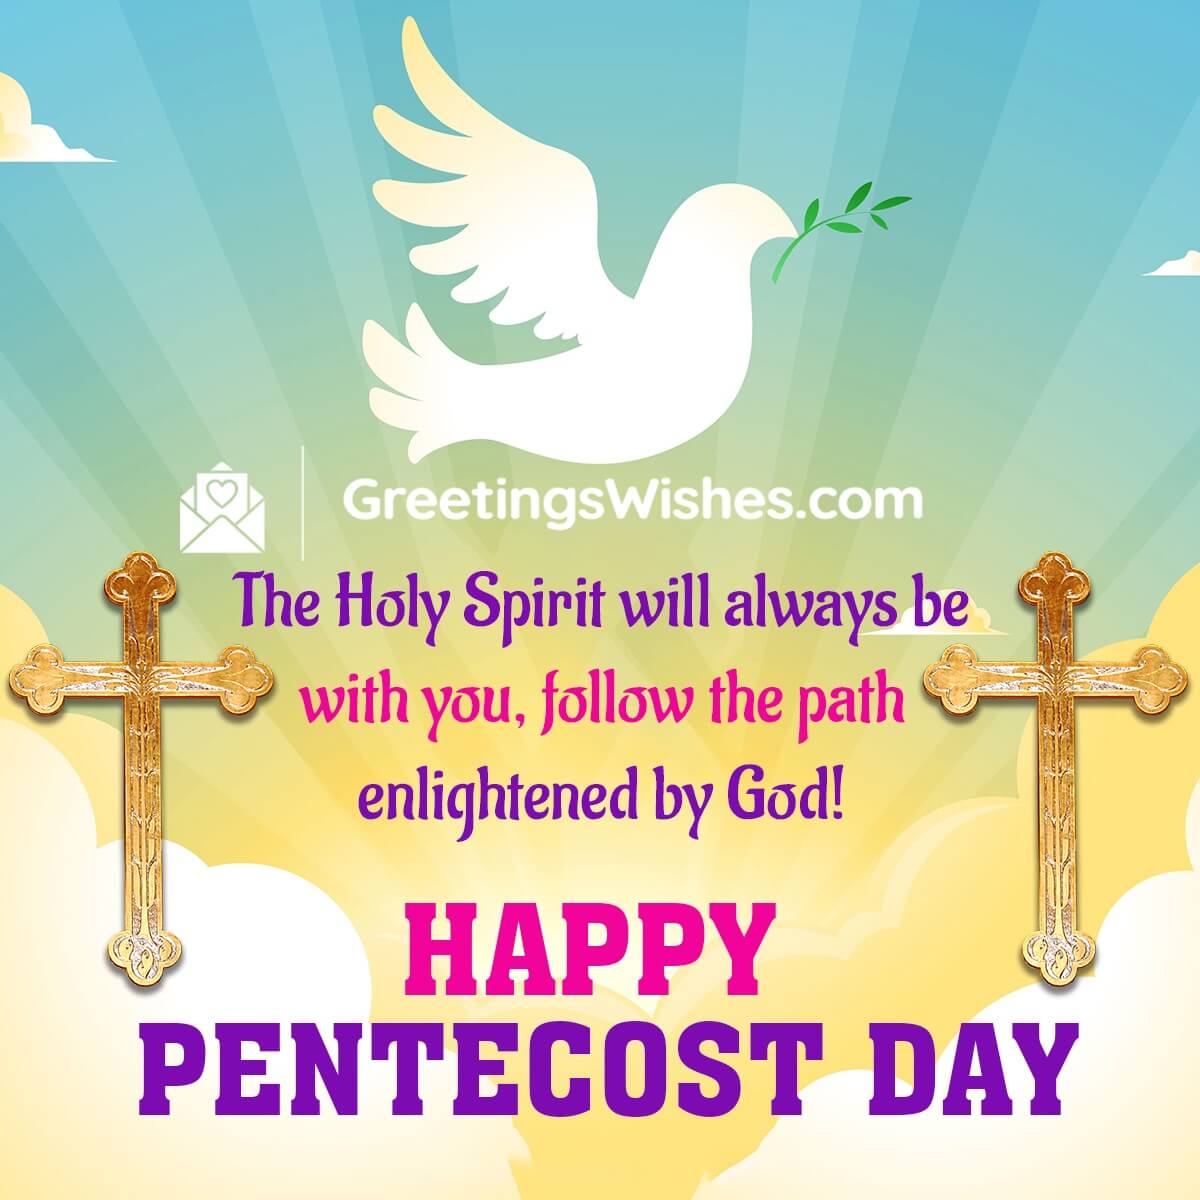 Happy Pentecost Day Wishes